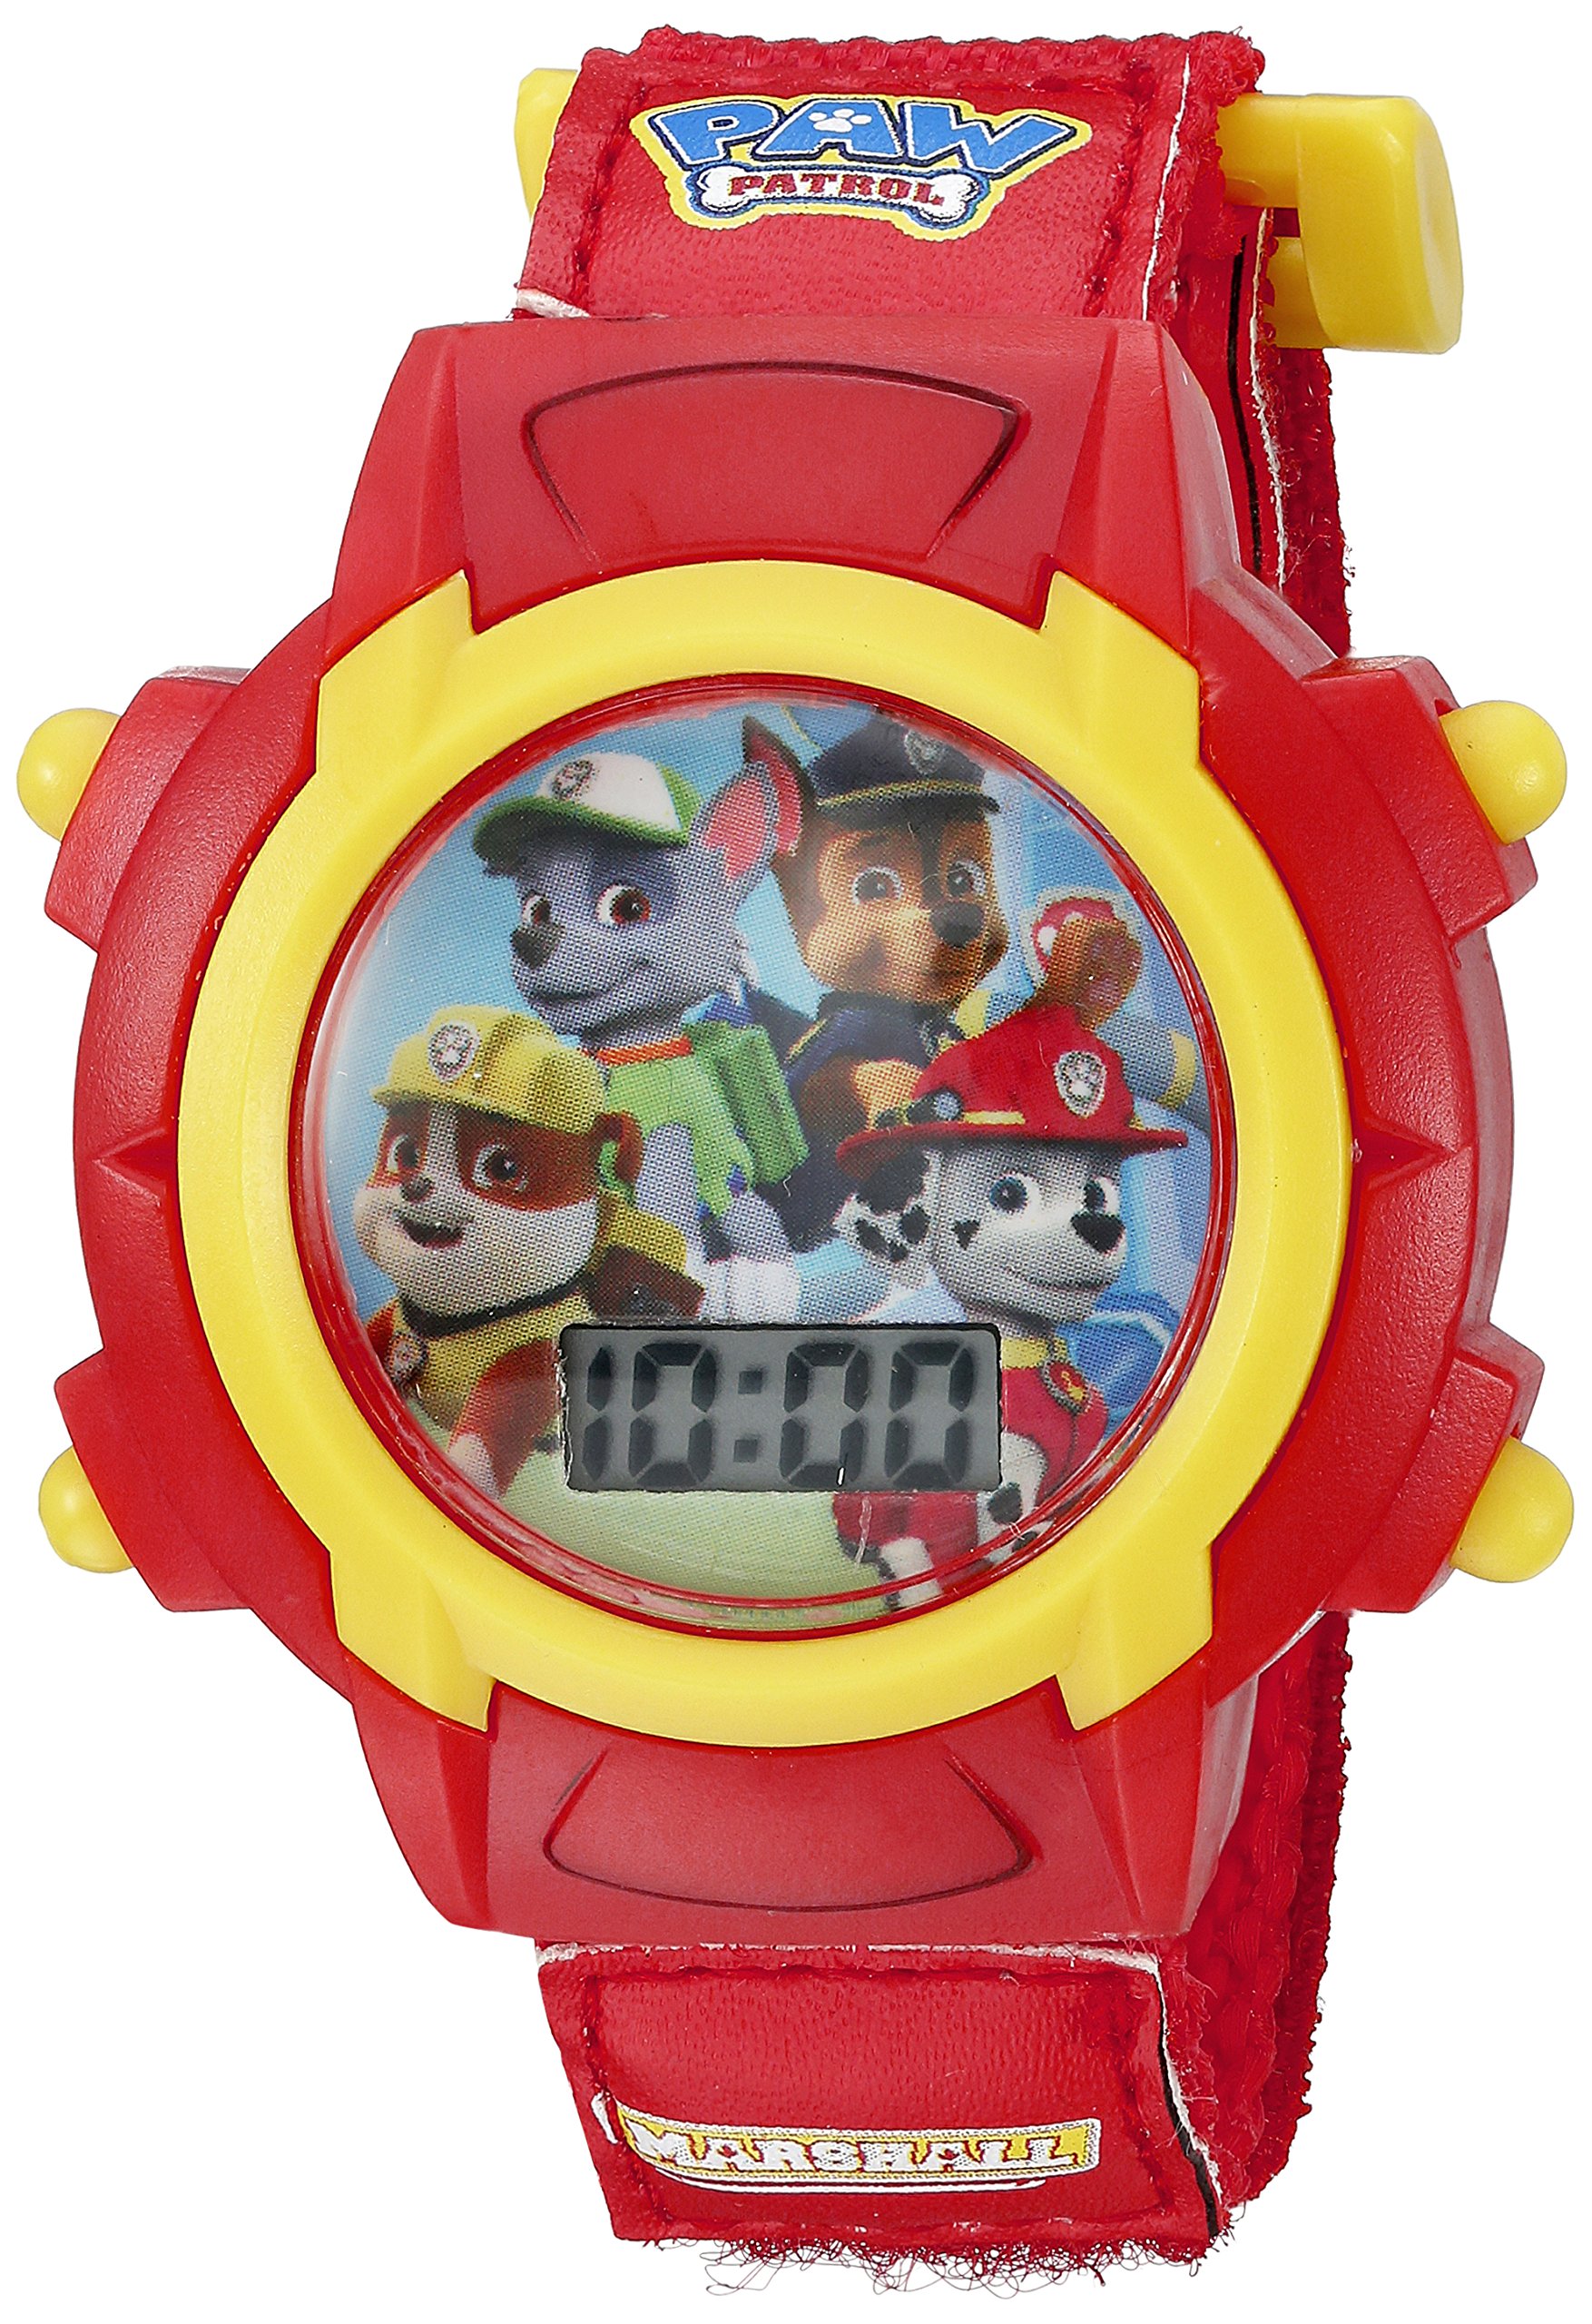 Accutime Kids Paw Patrol Digital LCD Quartz Wrist Watch, Cool Inexpensive Gift & Party Favor for Toddlers, Boys, Girls, Adults All Ages